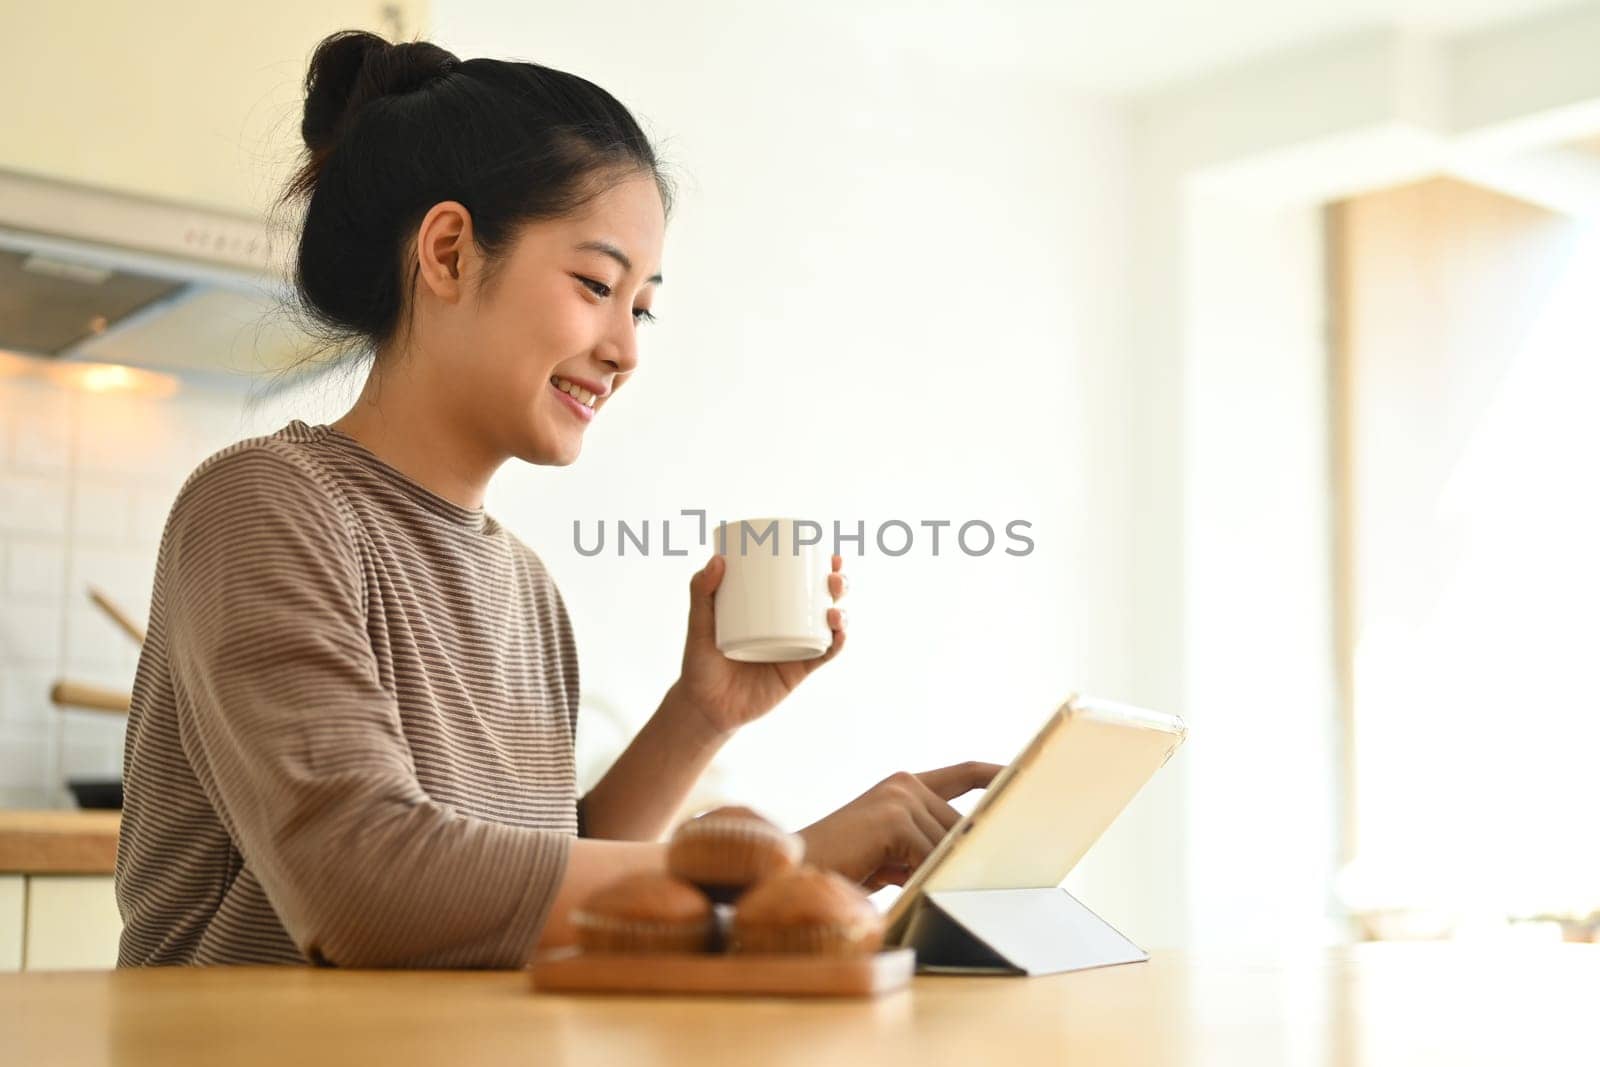 Attractive young woman drinking coffee and using digital tablet at table in kitchen.